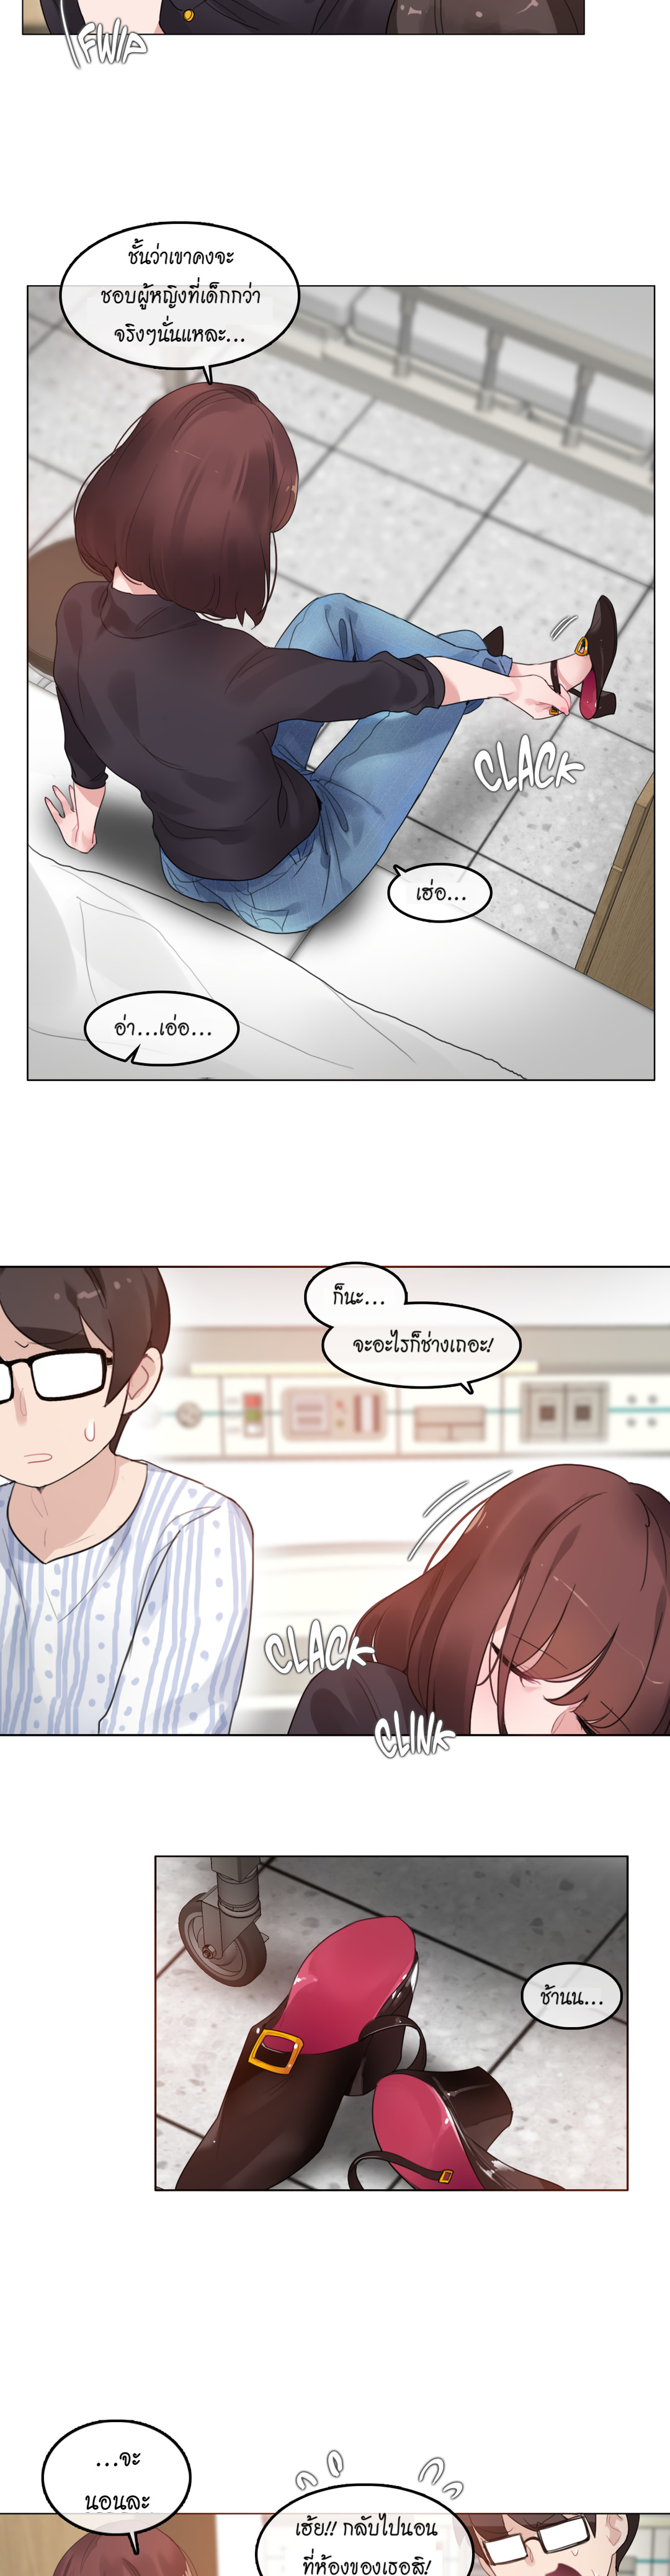 A Pervert’s Daily Life50 (10)